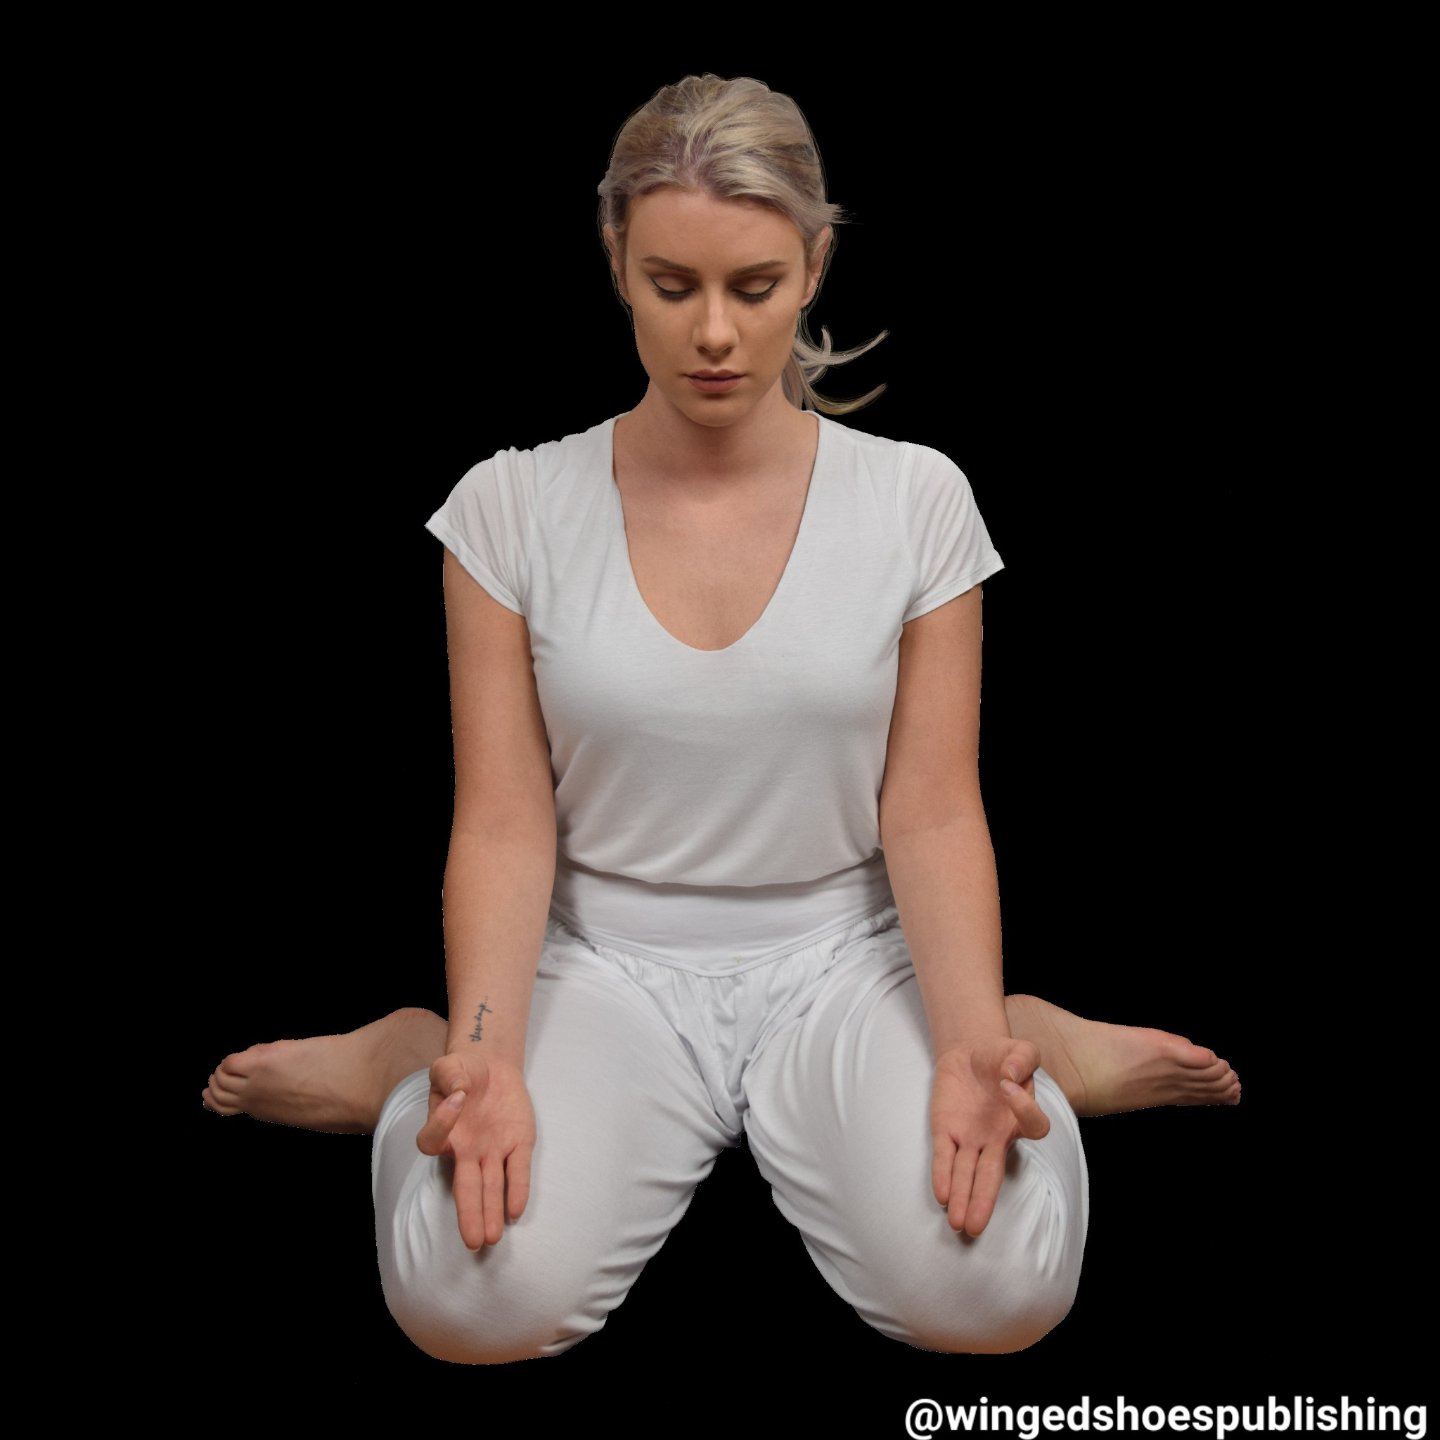 Manduki Mudra-Gesture of the Frog
Manduki means &quot;frog&quot; in Sanskrit, and it mimics the posture of a frog at rest. Its other name is the &quot;Gesture of the Frog,&quot; or &quot;Frog Attitude.&quot; This Mudra stimulates Muladhara Chakra and